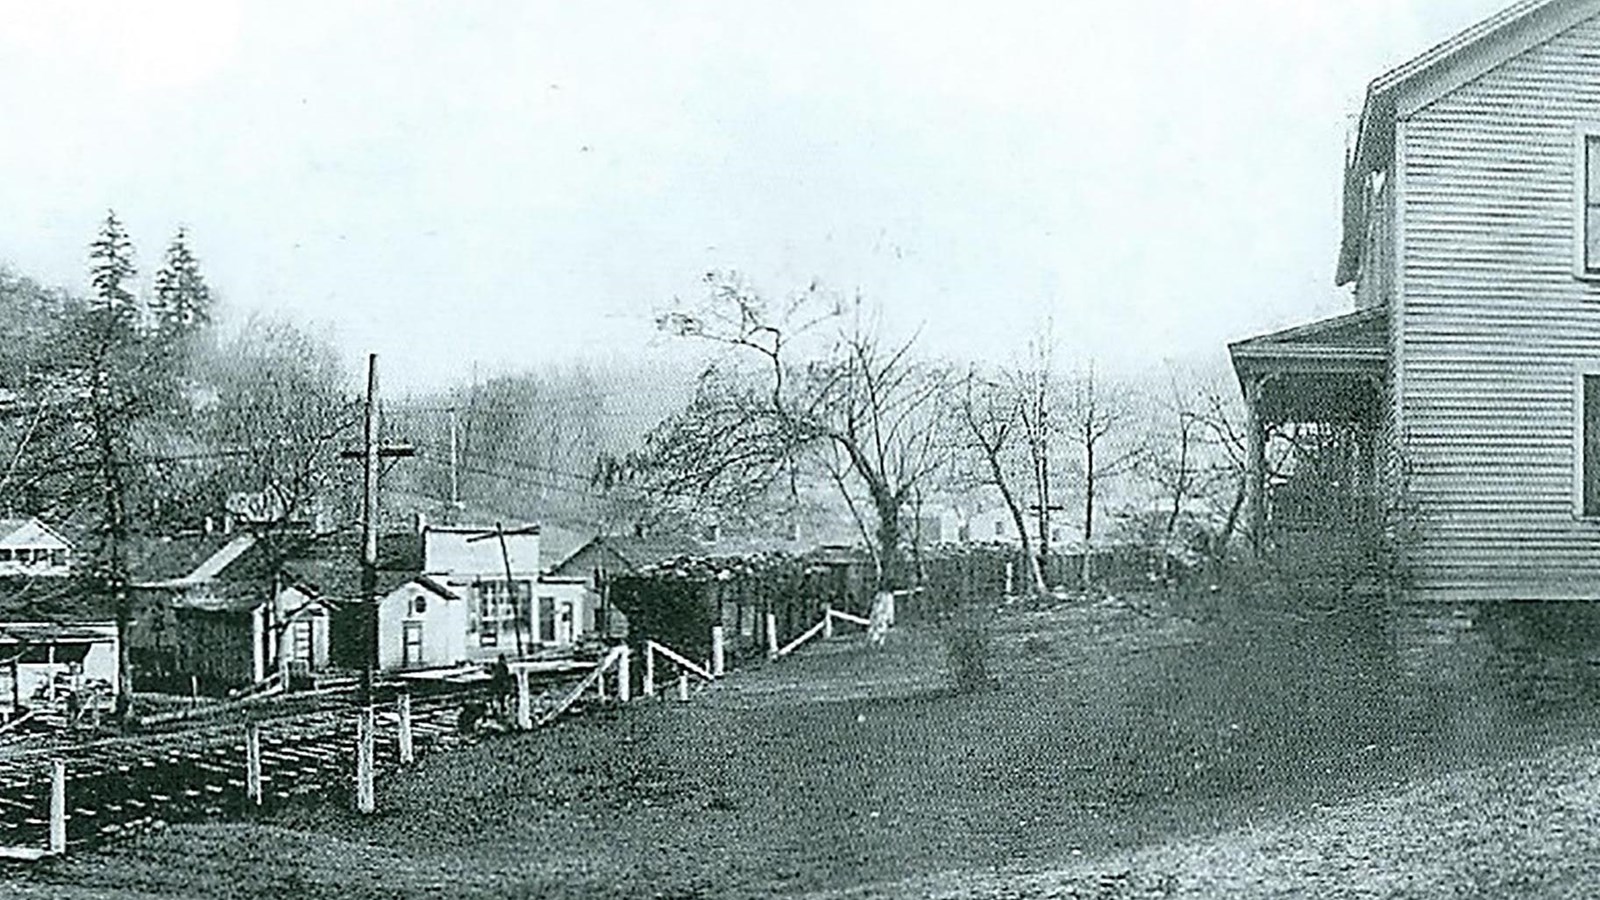 Historical black and white photo of a small town with houses